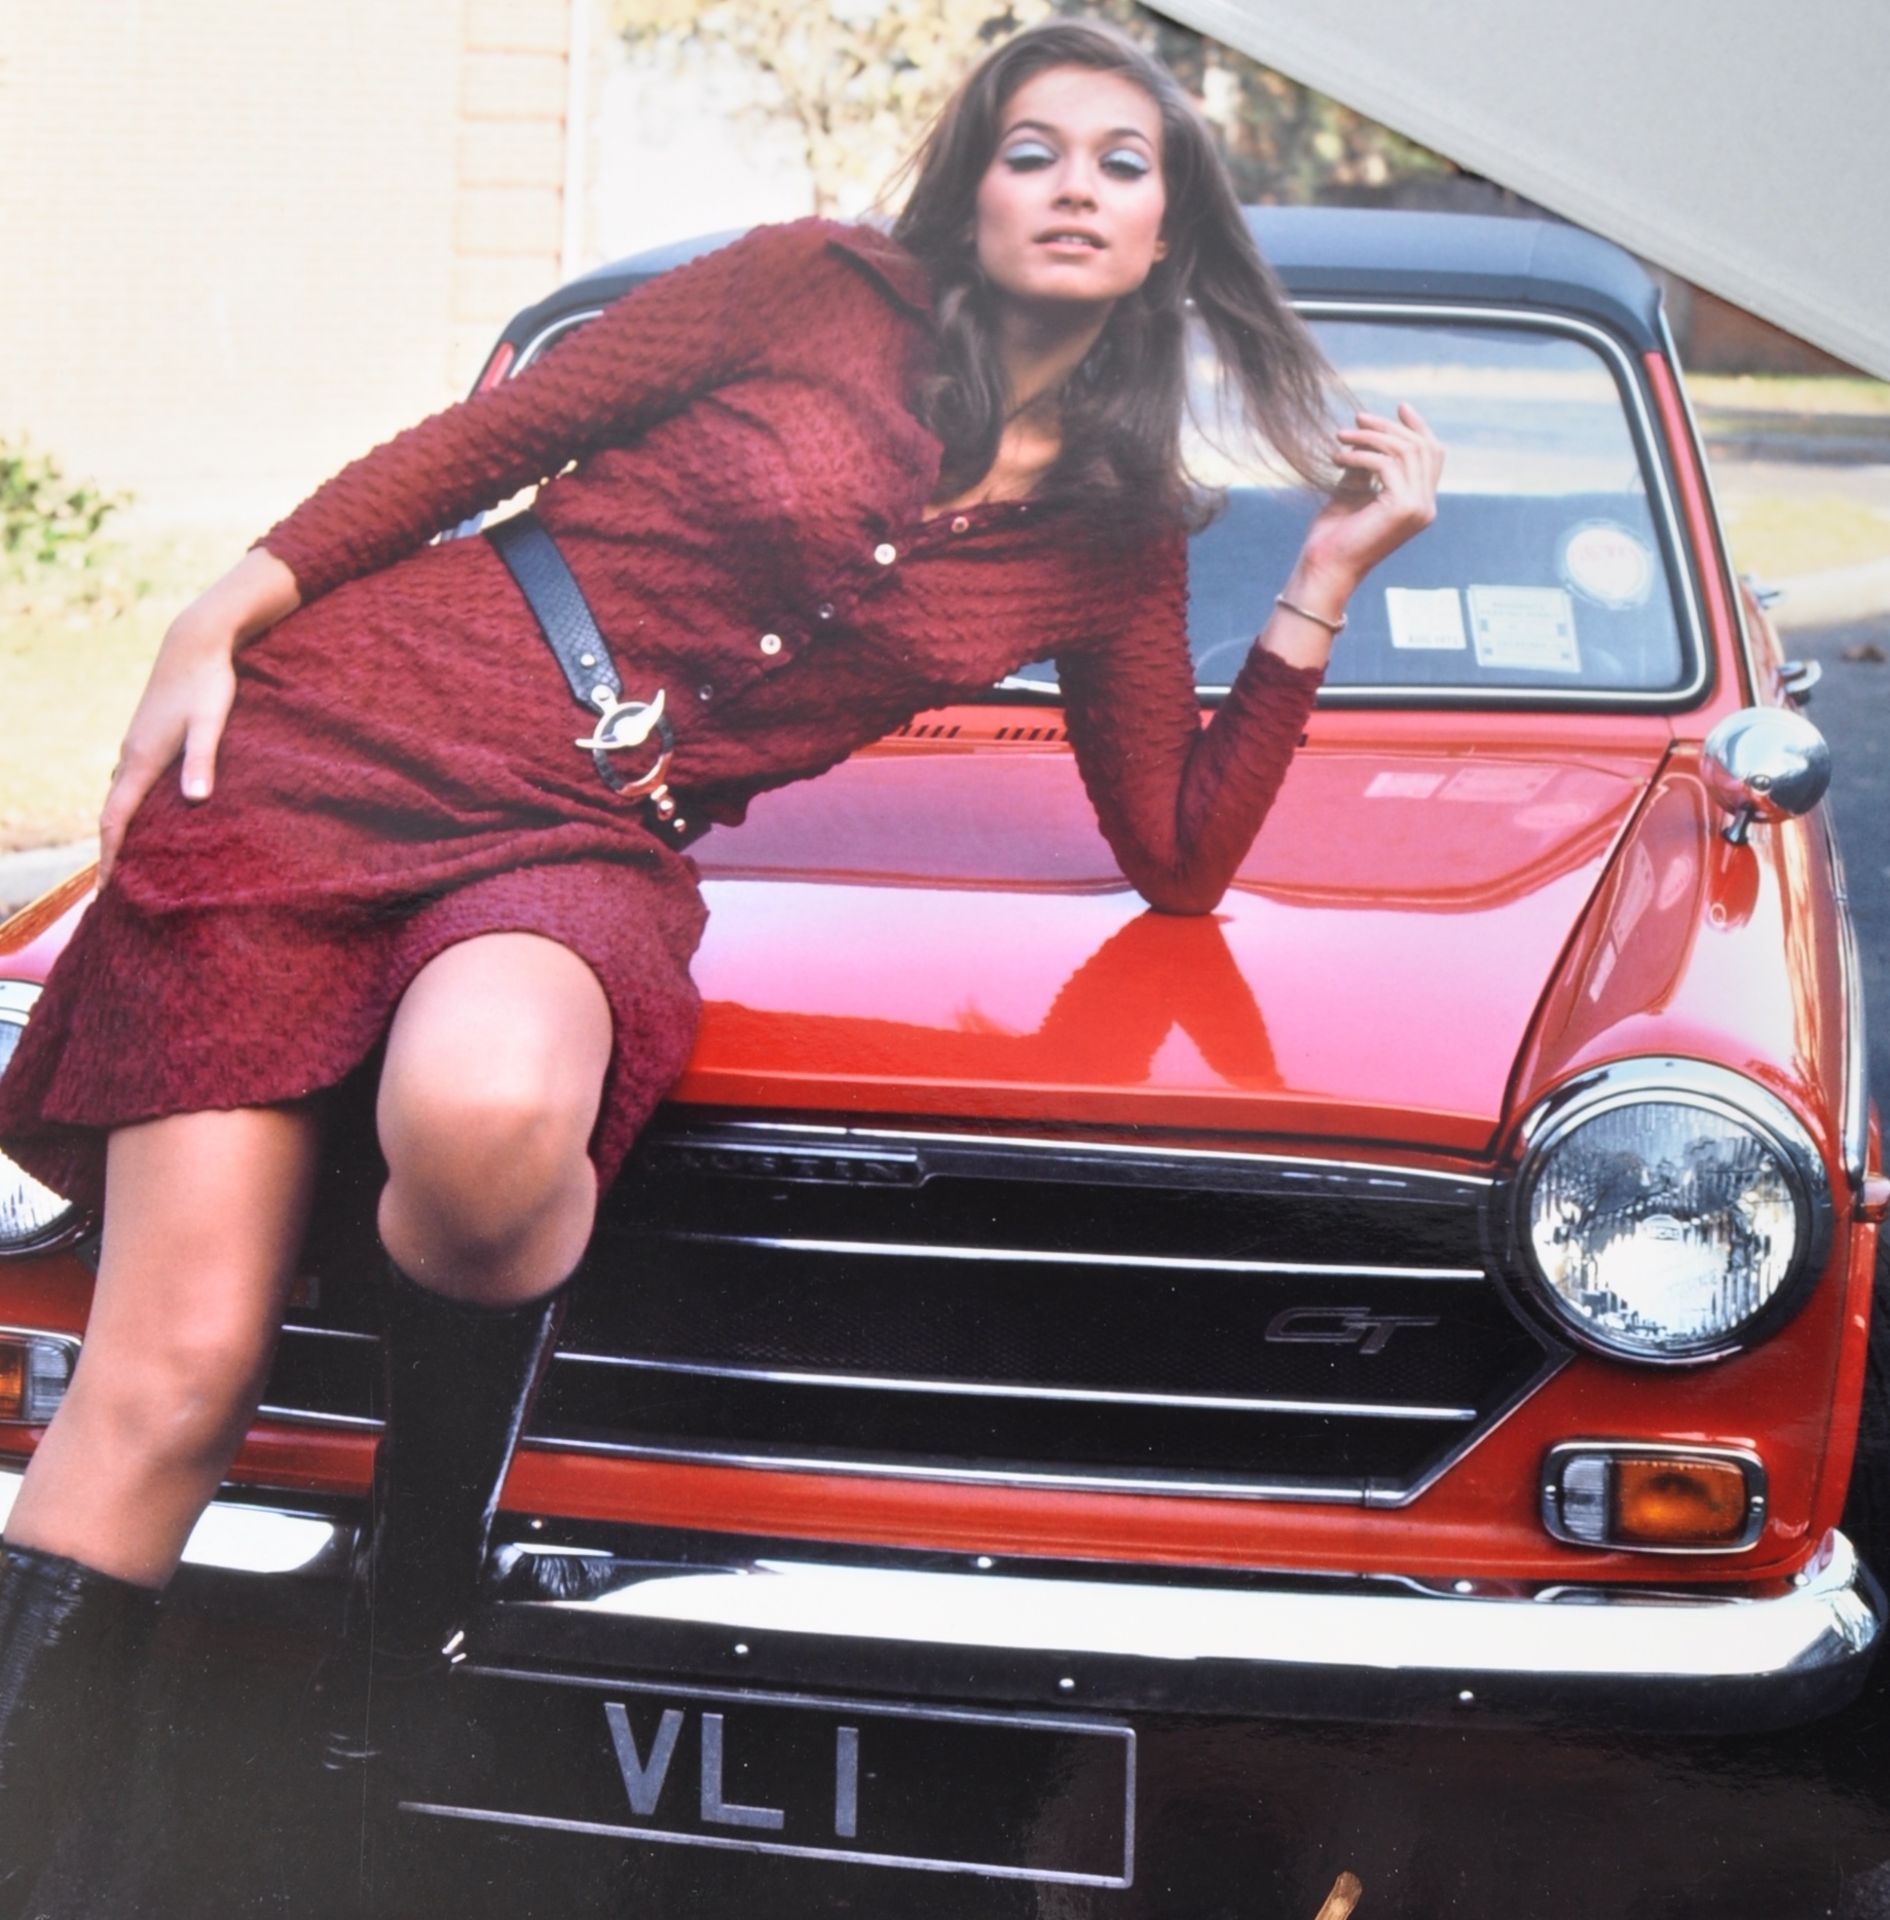 COLLECTION OF VALERIE LEON - MS LEON'S PERSONAL NUMBERPLATE - Bild 3 aus 3